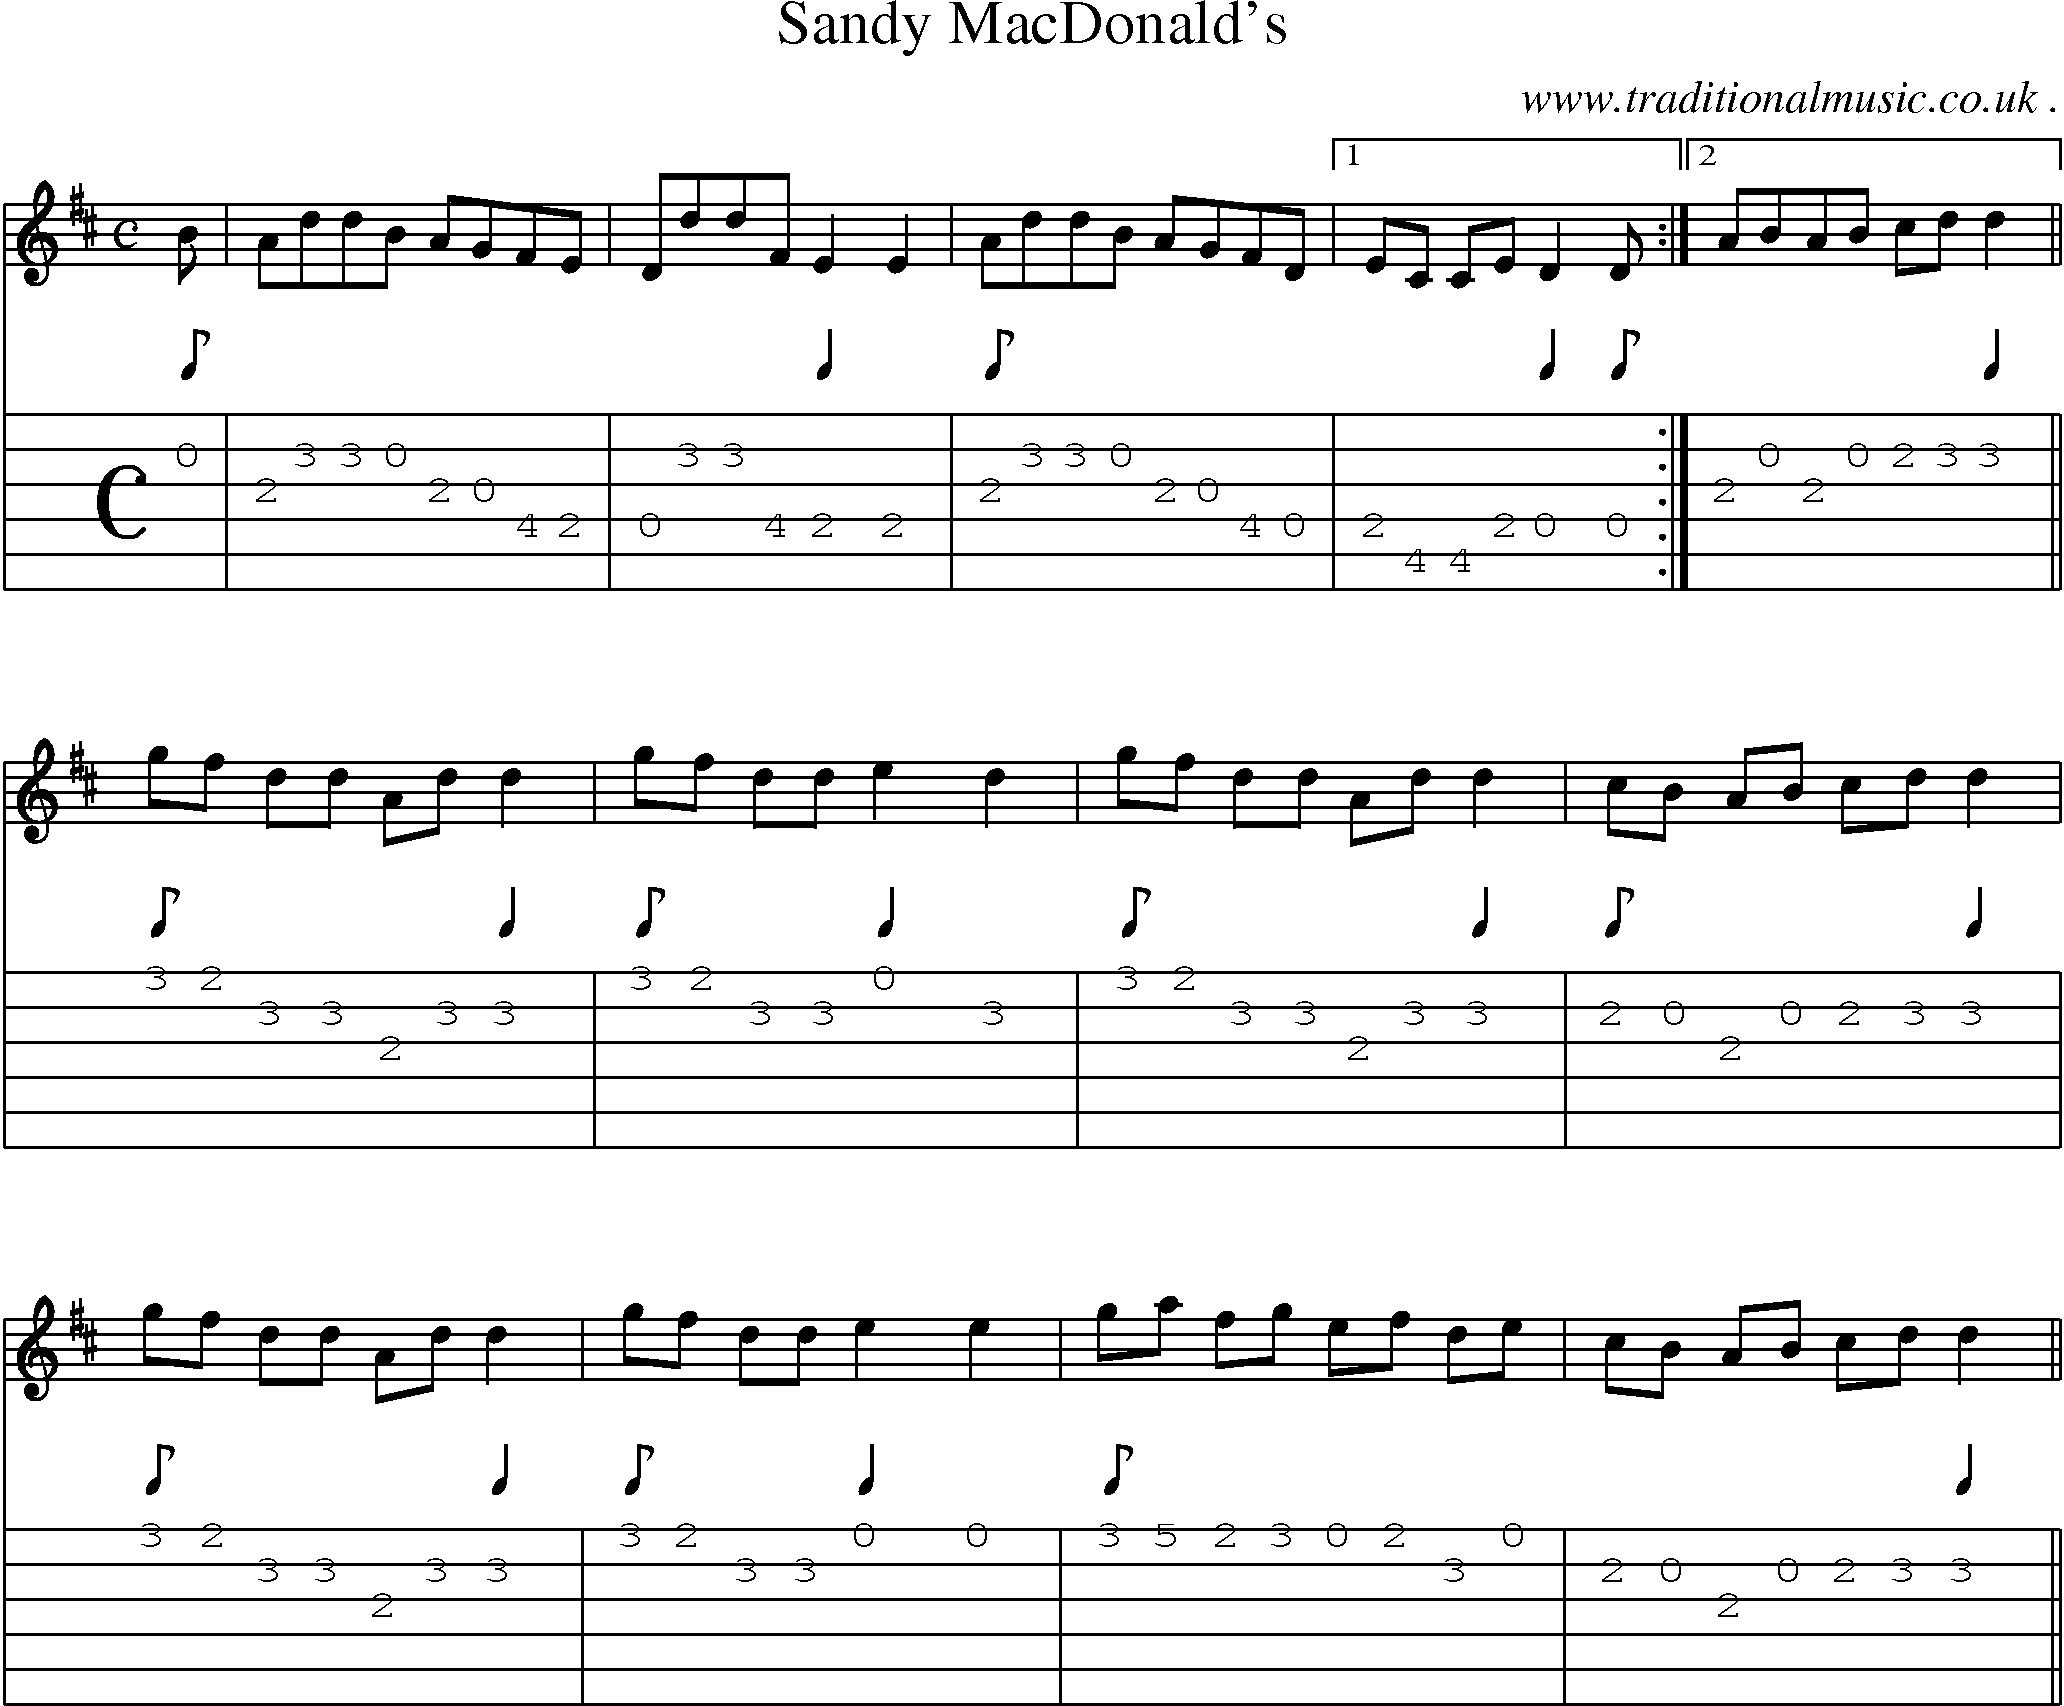 Sheet-music  score, Chords and Guitar Tabs for Sandy Macdonalds